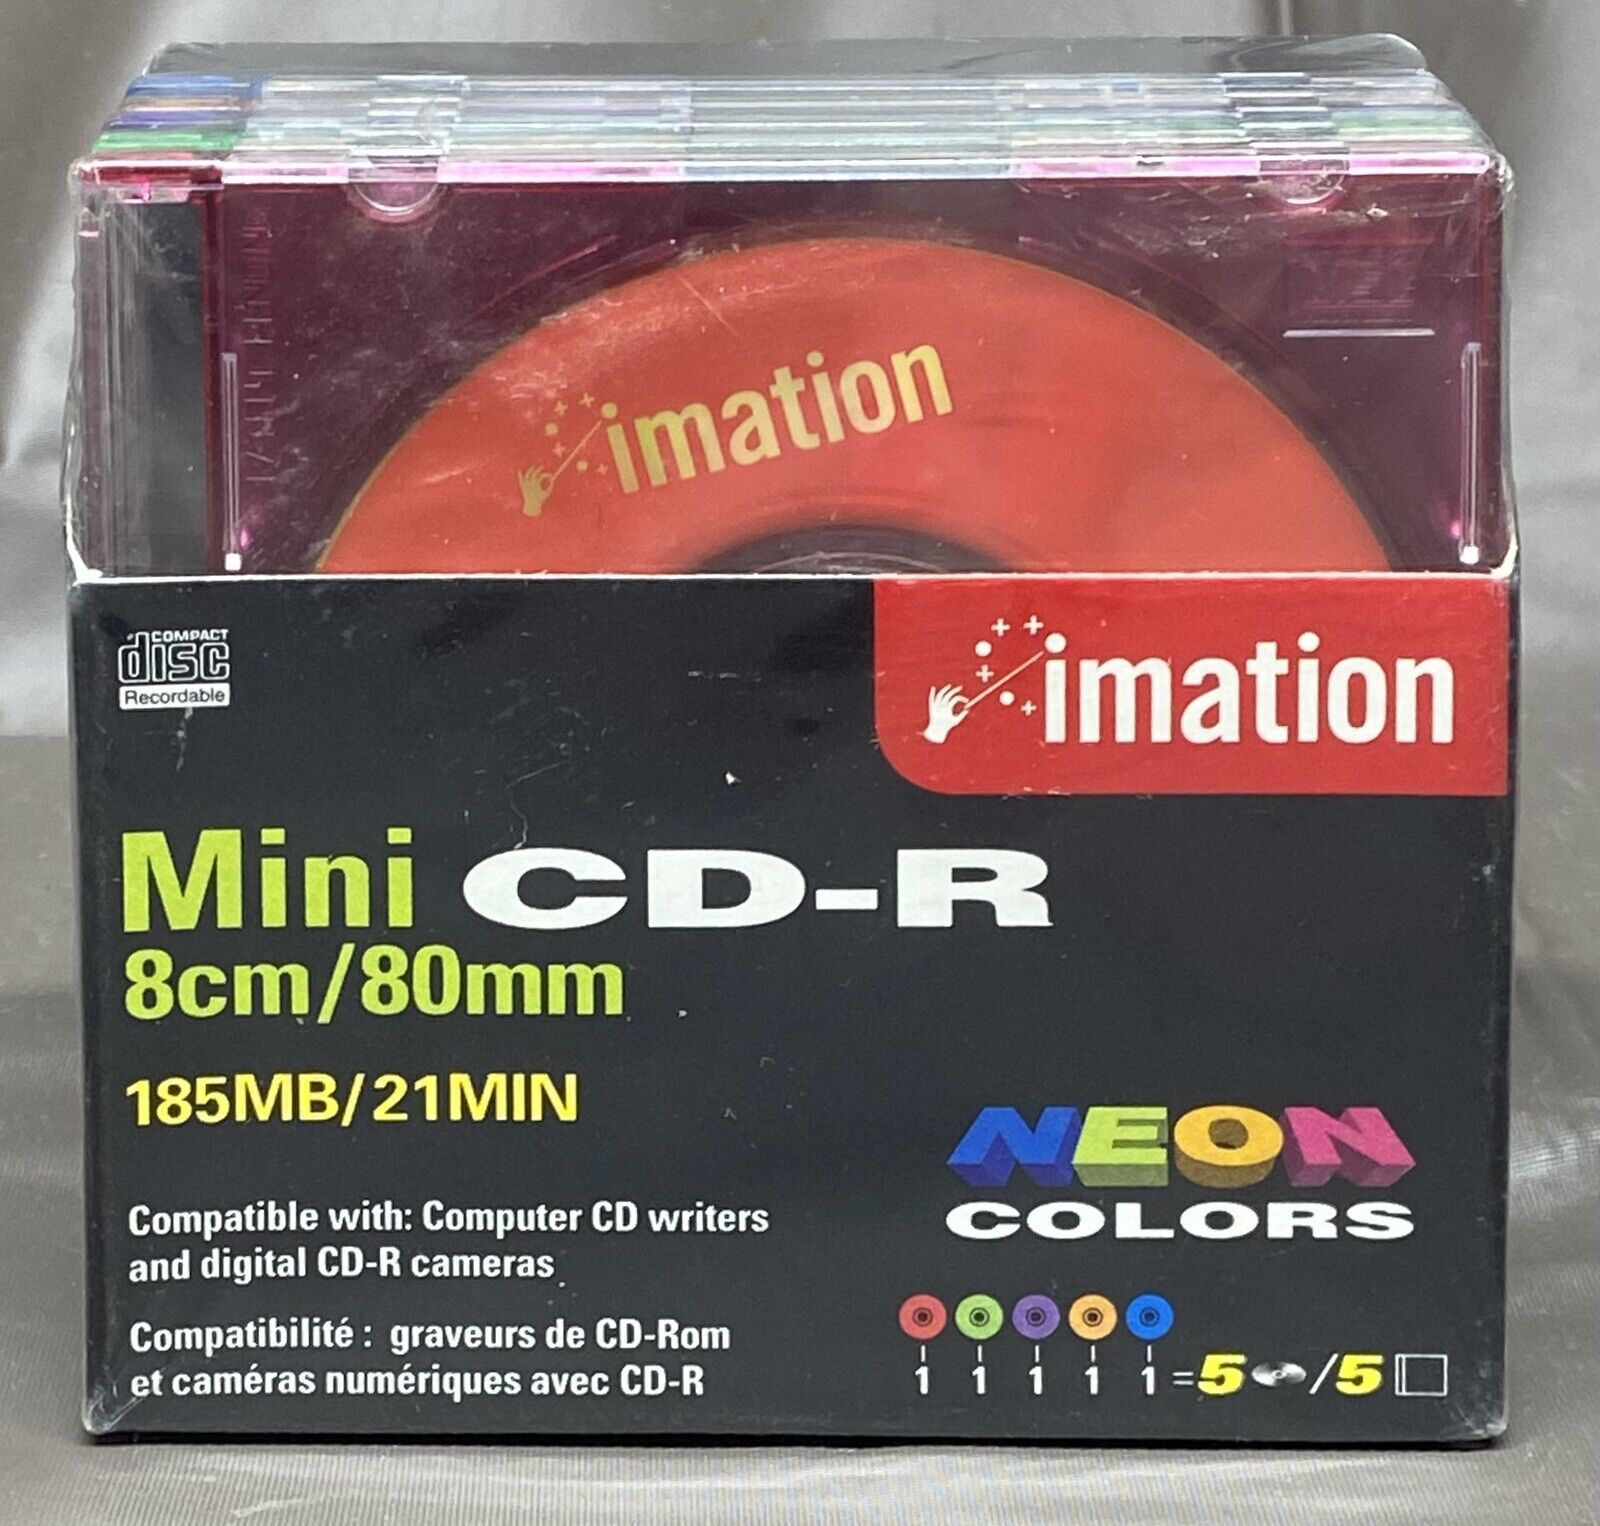 Imation 5 Neon Mini CD-R 202MB/23MIN 8cm/80MM For Cameras Computer